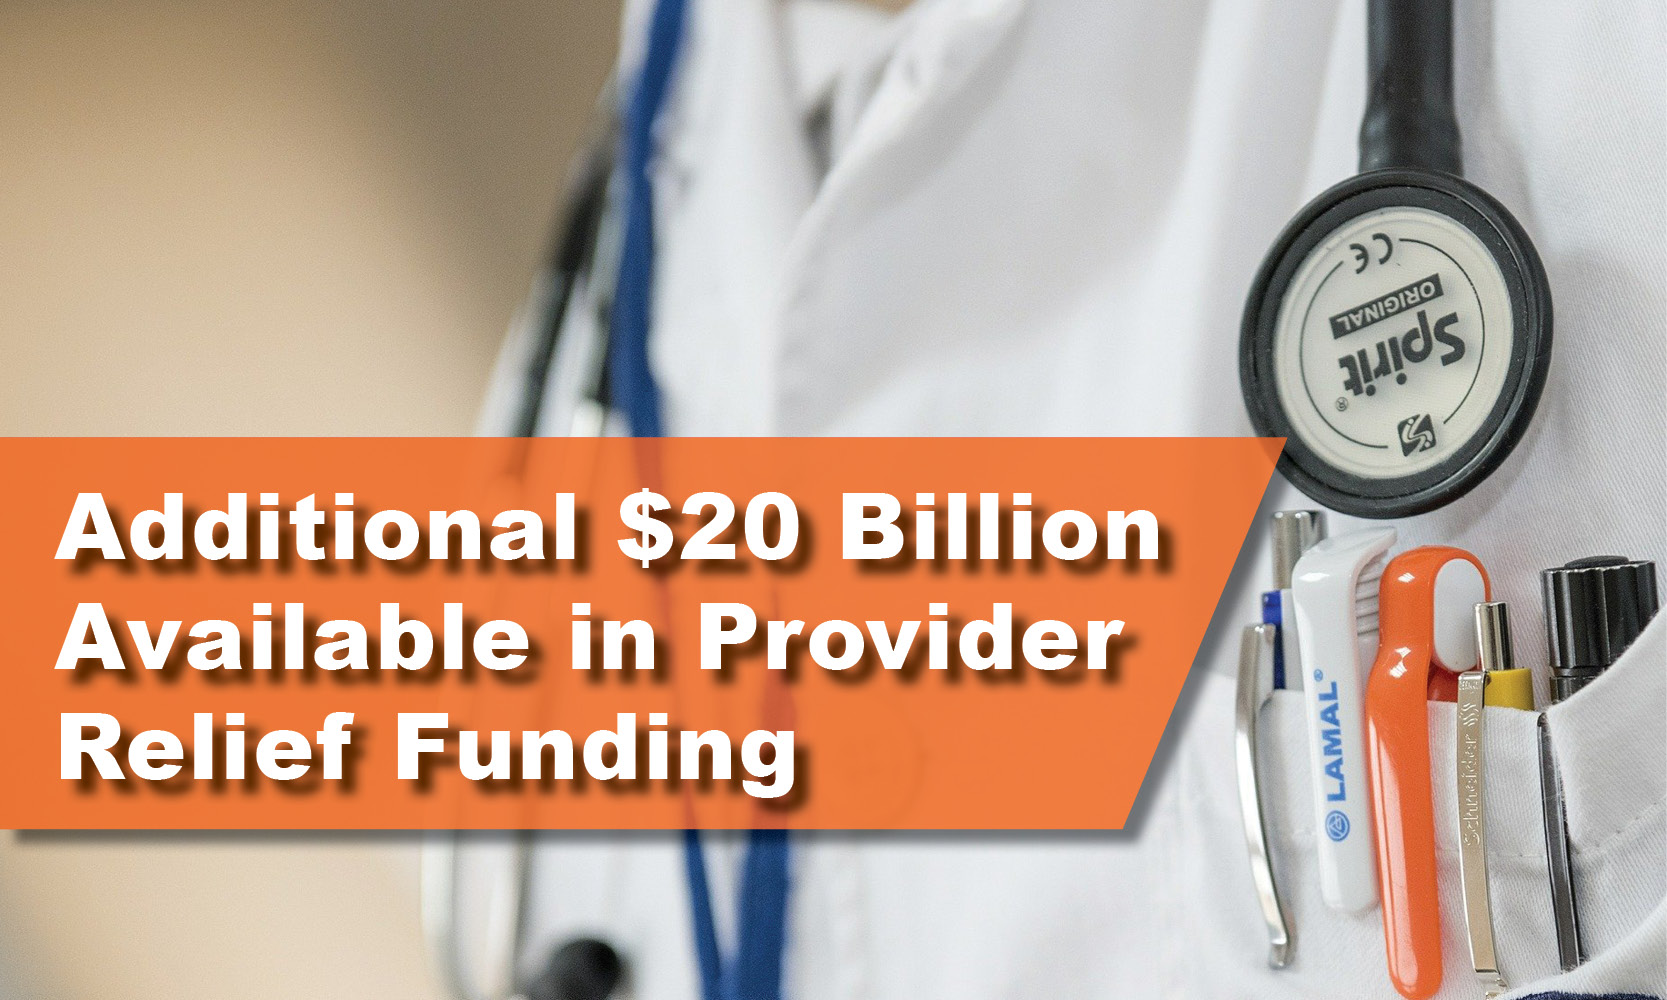 Additional $20 Billion Available in Provider Relief Funding